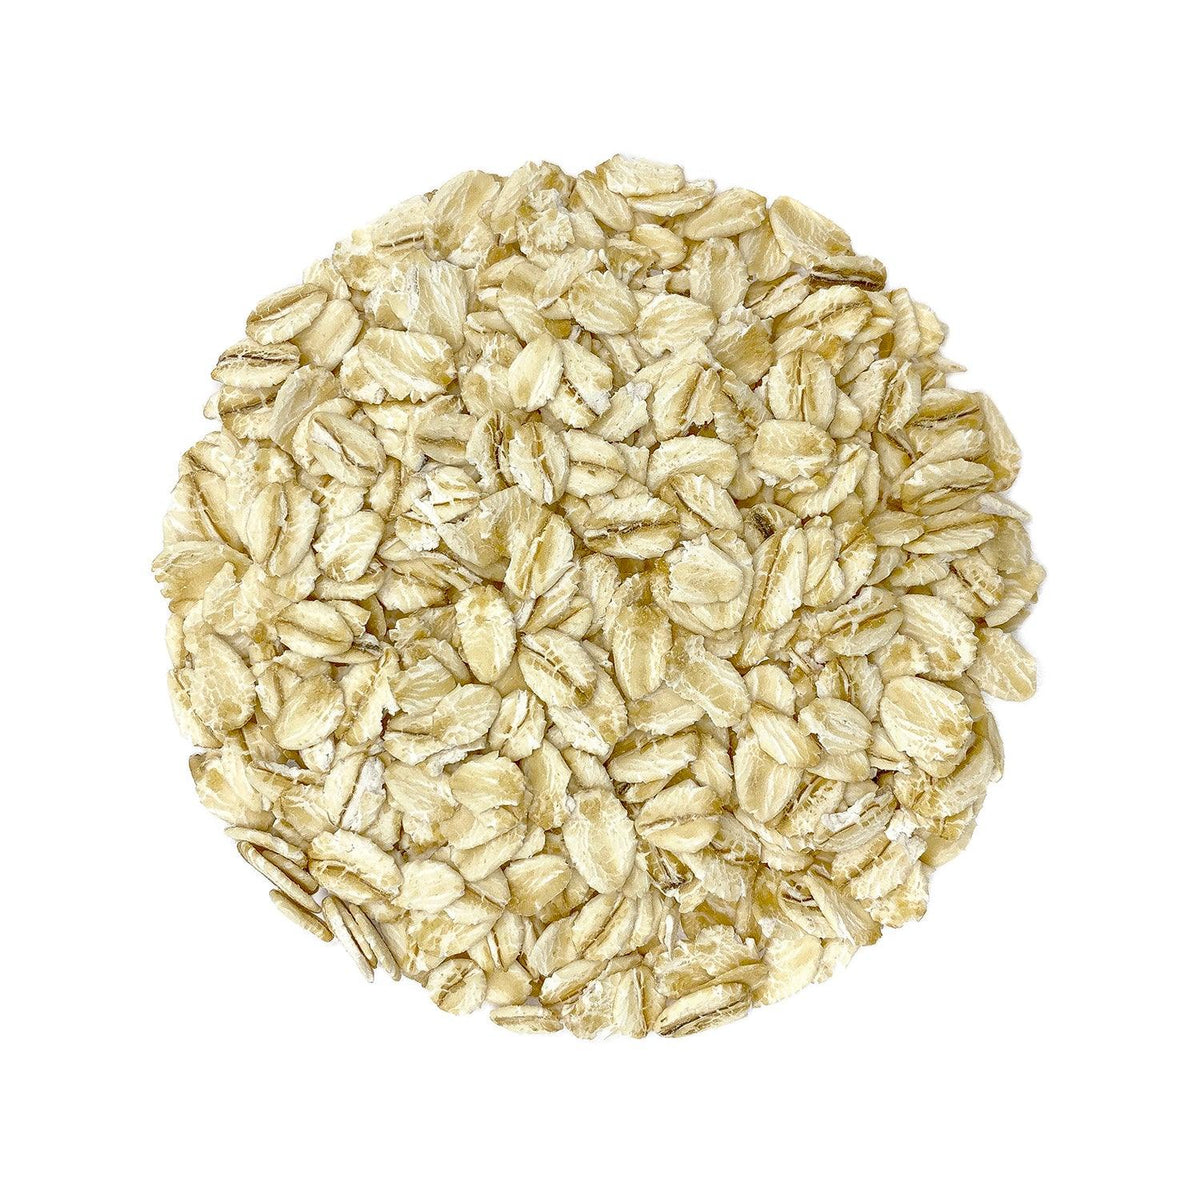 Oats Rolled - Old Fashioned in 600g pack - Organic, Gluten-free & Wholesome - Superior Quality Grains without Preservatives - Satopradhan